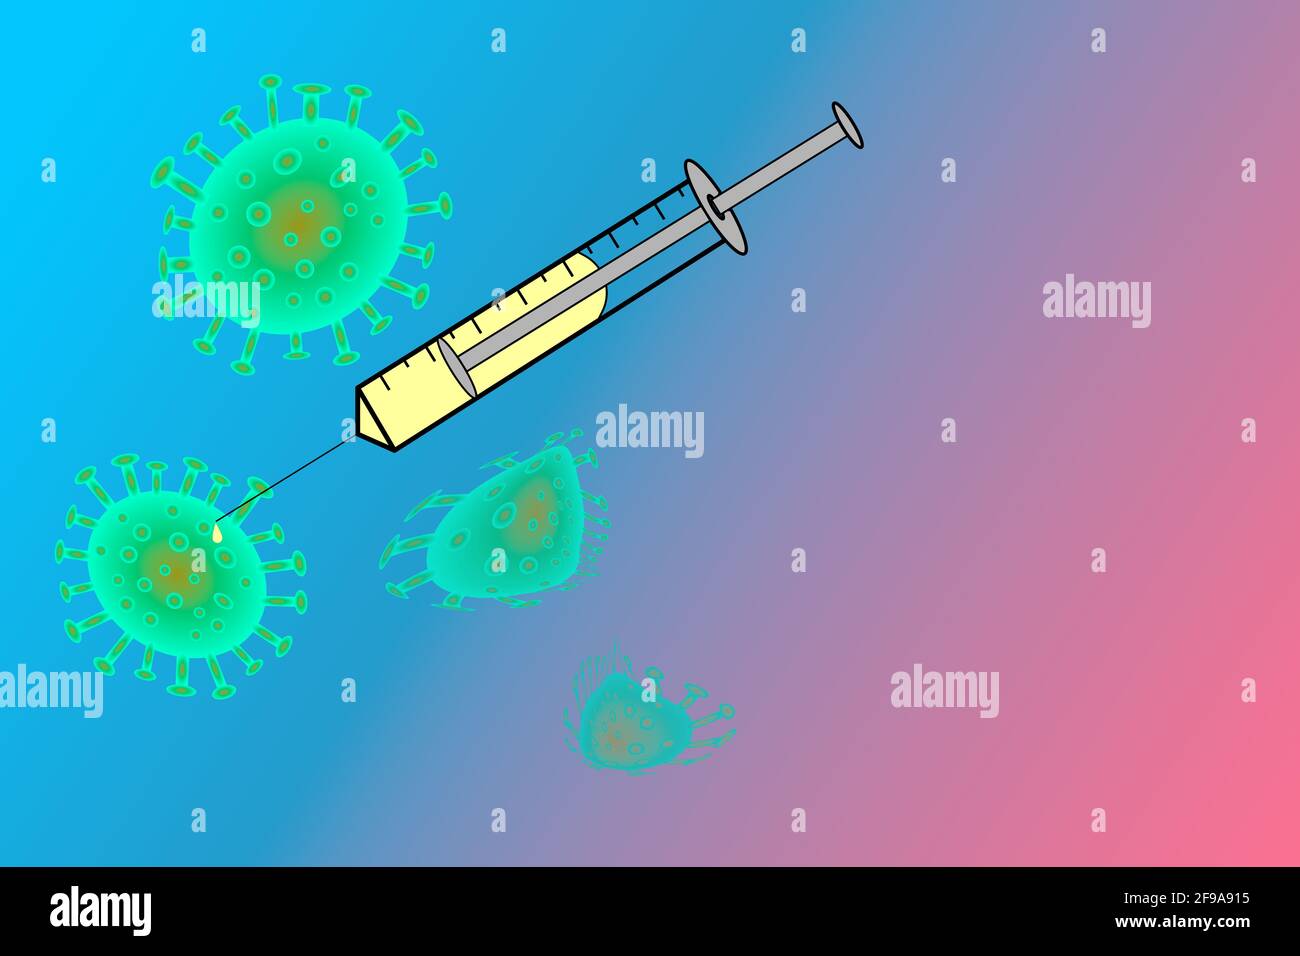 A COVID-19 virus is vaccinated with a syringe and thereby rendered harmless. Syringe, corona, virus, serum Stock Photo